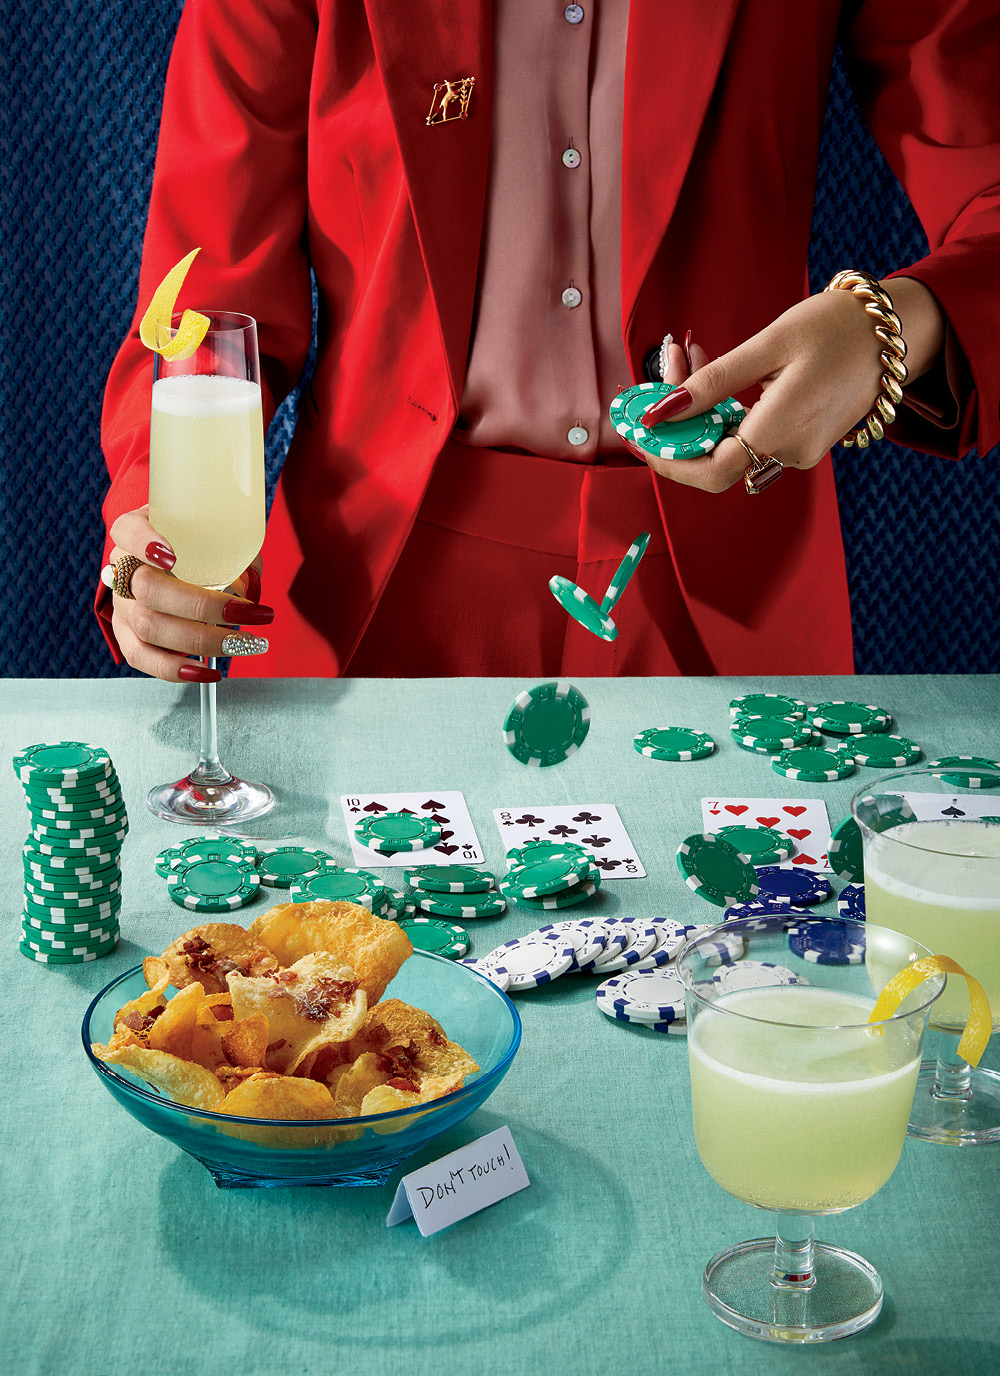 A woman in a red suit with red nails holds a limoncello prosecco cocktail with a lemon garnish, she is dropping game chips onto a table laden with cards and parmesan and parma ham chips, it has a green tablecloth